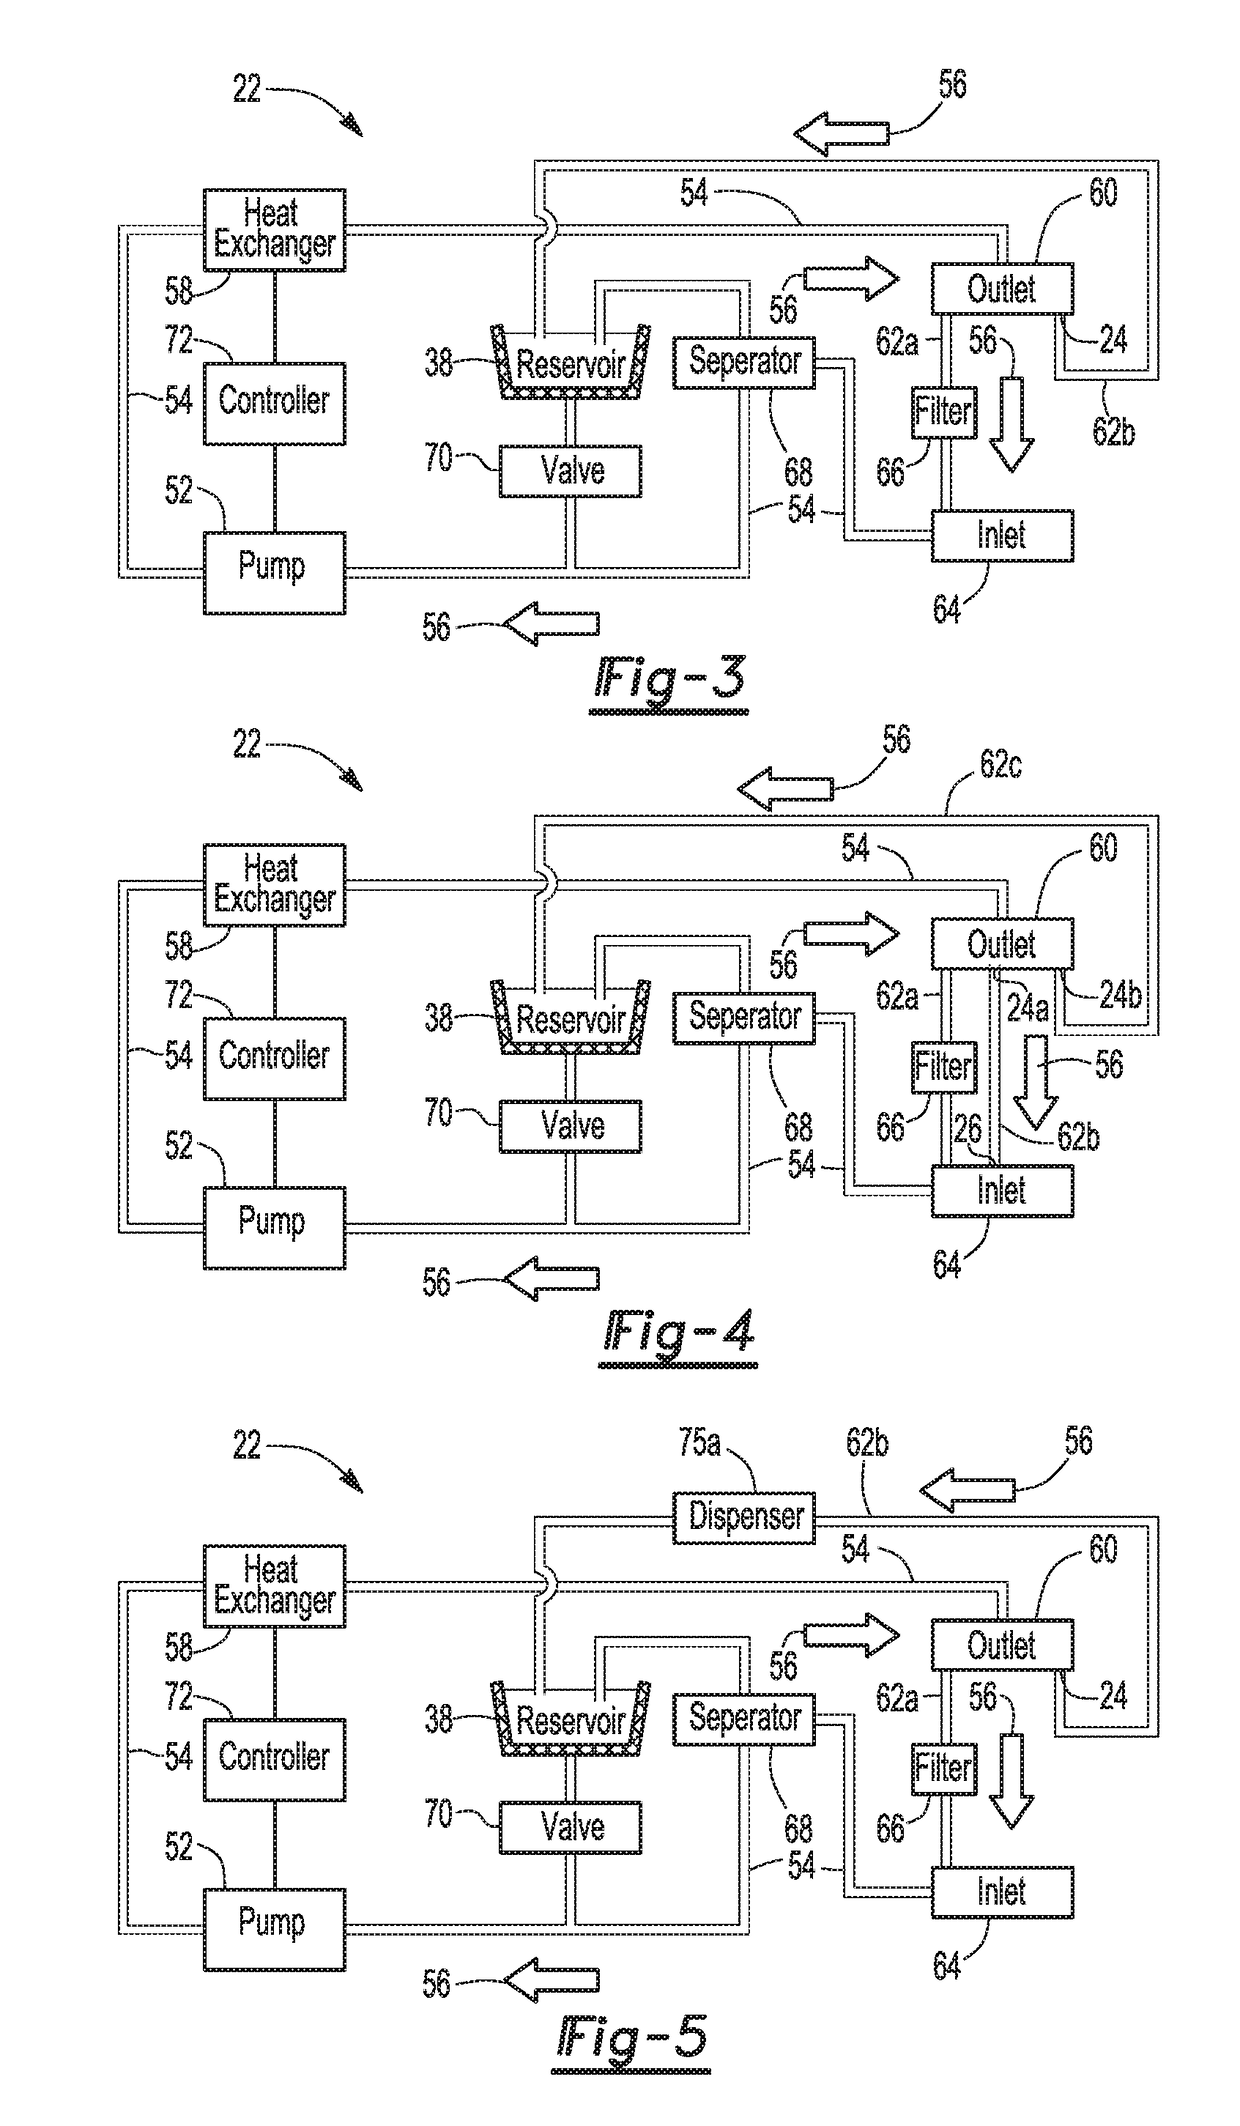 Method of disinfecting a thermal control unit